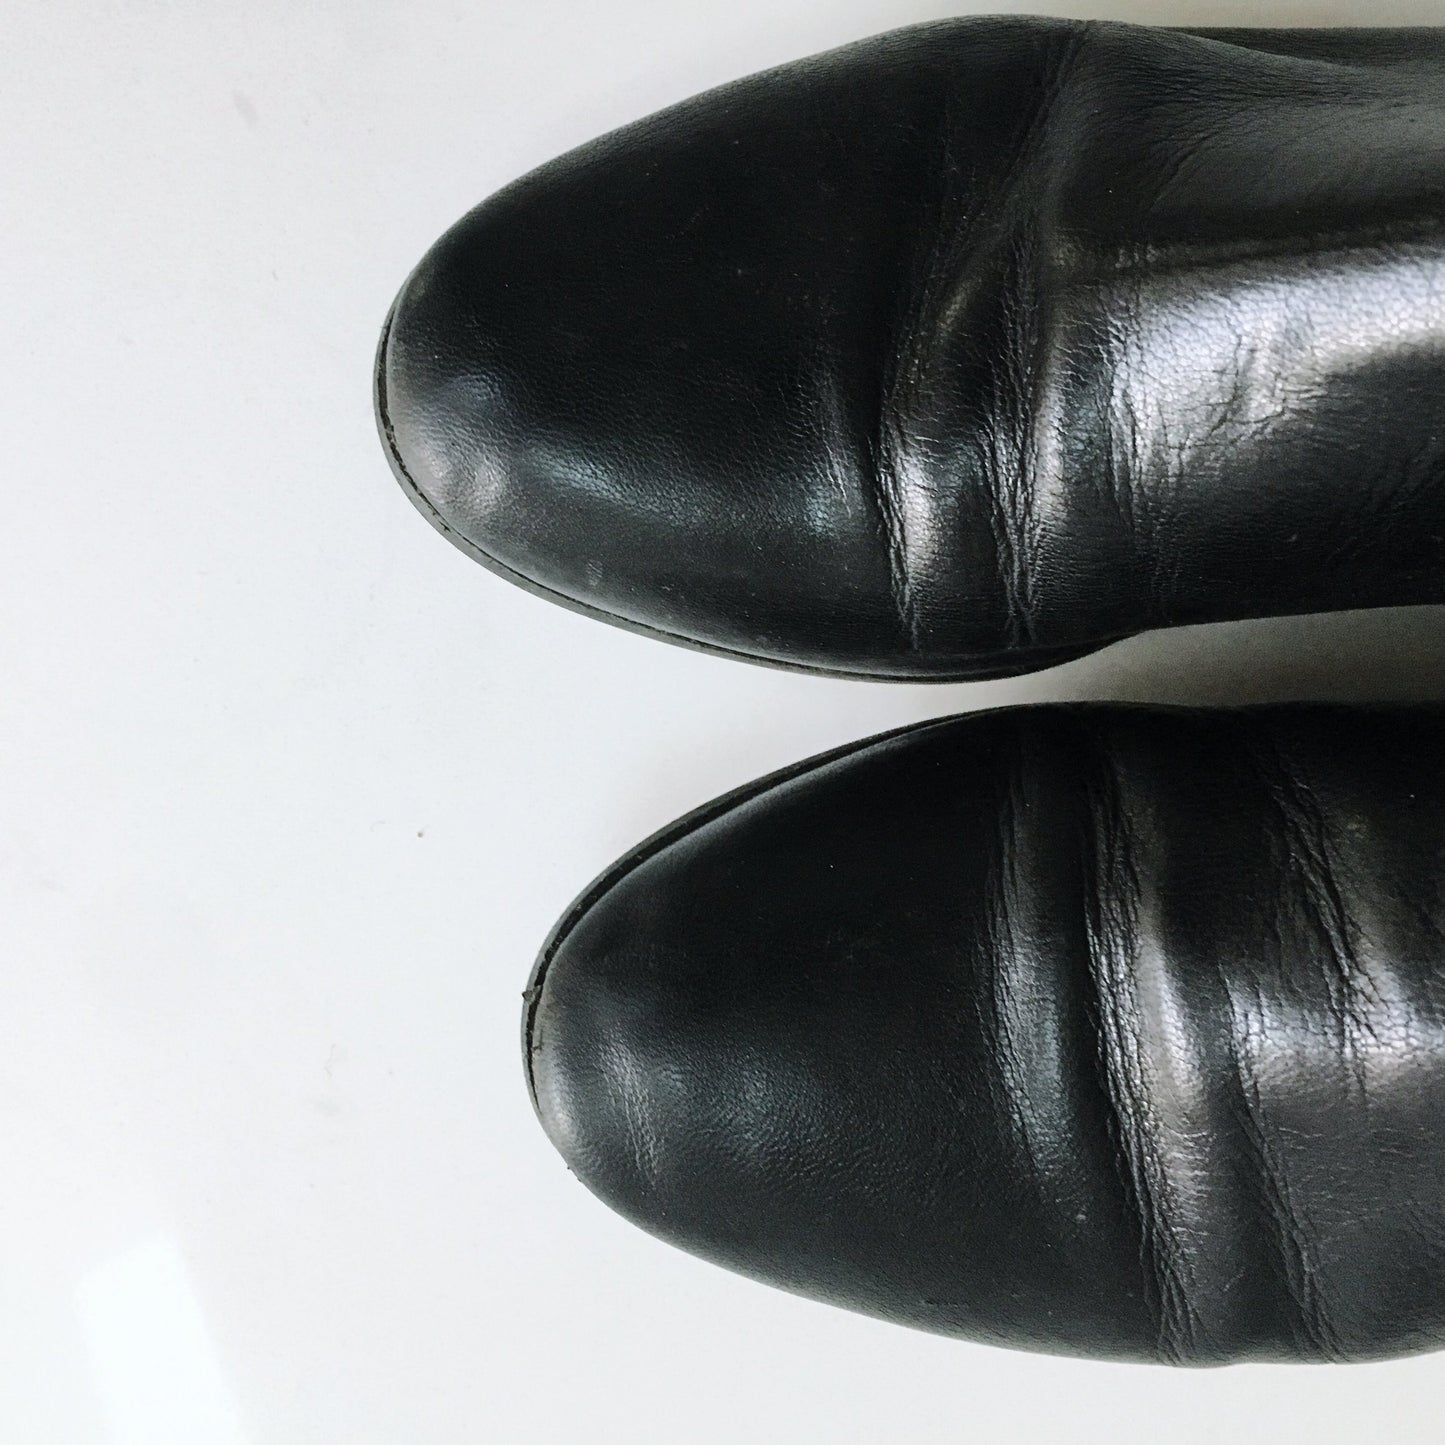 Cole Haan Black Leather Boots with Gold Zippers - size 5.5